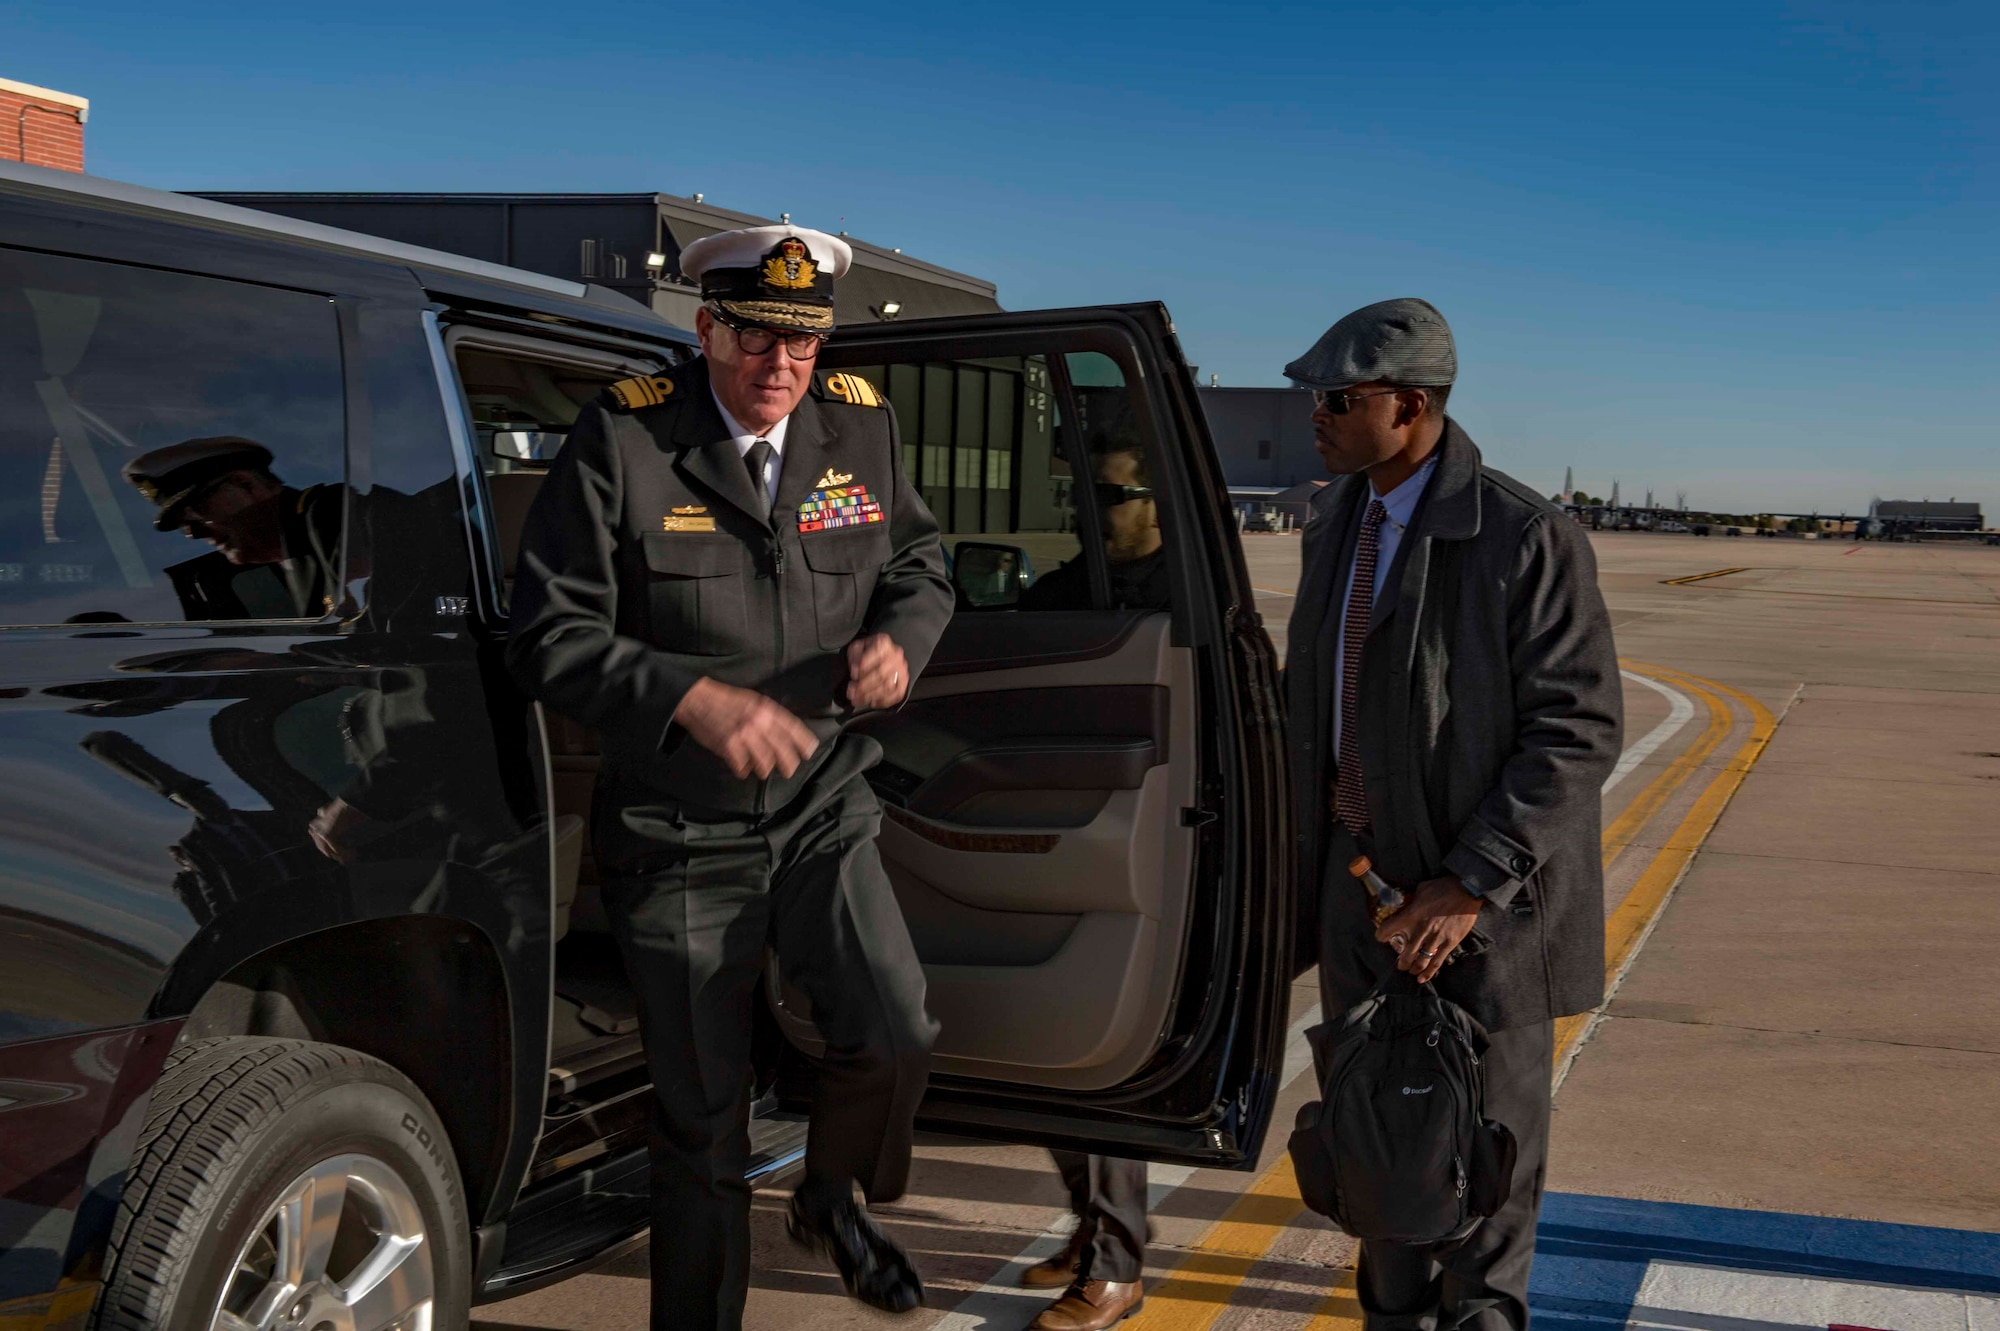 AFOSI SA Donavan Muir (right) assists Vice Adm. Ray Griggs, Vice Chief of the Australian Defence Force, at Peterson AFB, Colo., Dec. 3, 2017. SA Muir was part of a PSO mission providing security for Griggs. (U.S. Air Force photo by Dave Grim)